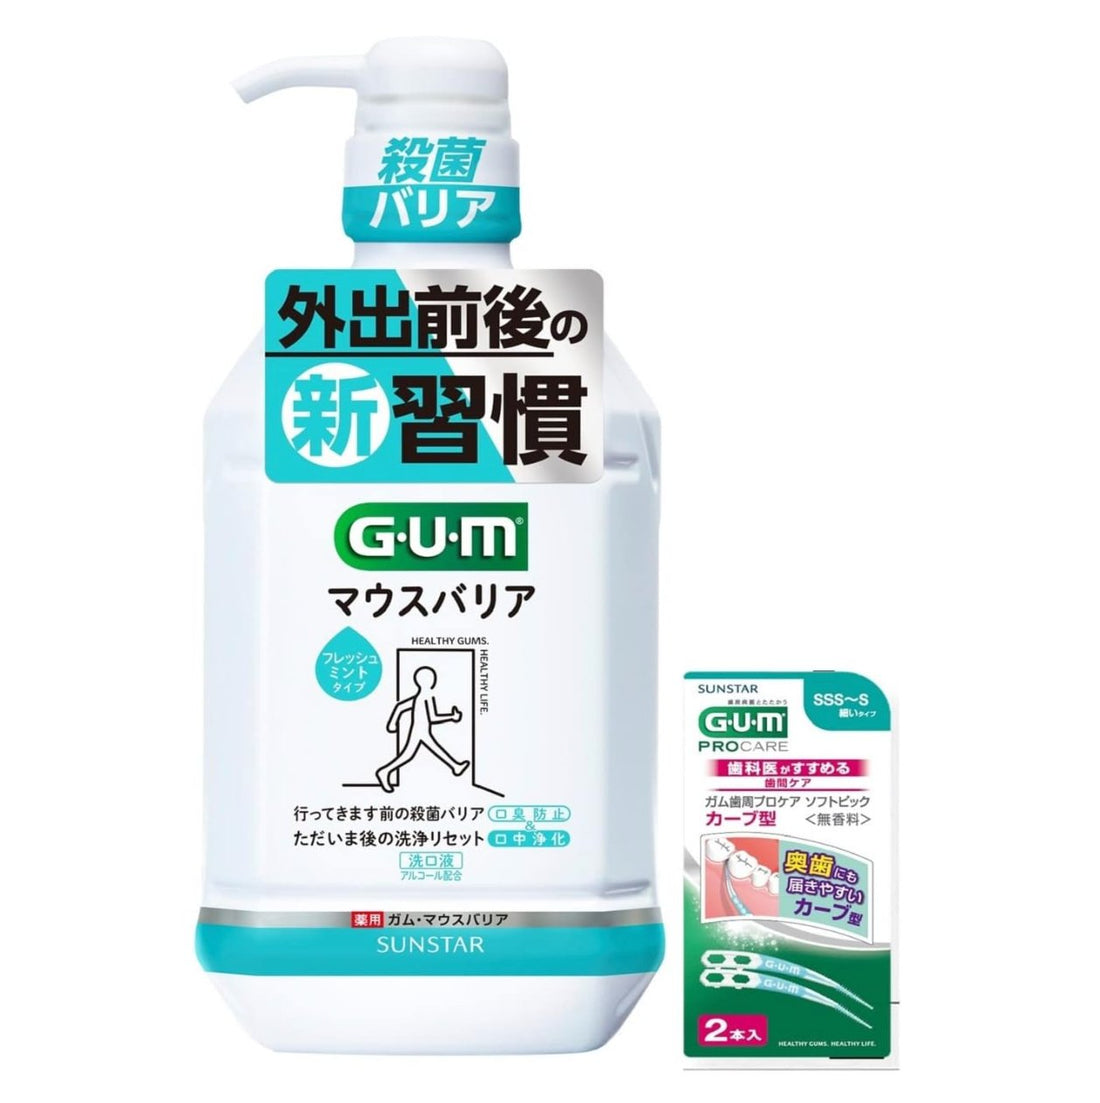 GUM [Quasi-drug] Mouthwash Mouth barrier Medicated mouthwash CPC combination Sterilizes and cleans your mouth for a long time Prevents bad breath [Fresh mint type Alcohol combination] &lt;Hagki Care Liquid Dental Rinse&gt; 900ml + bonus - NihonMura